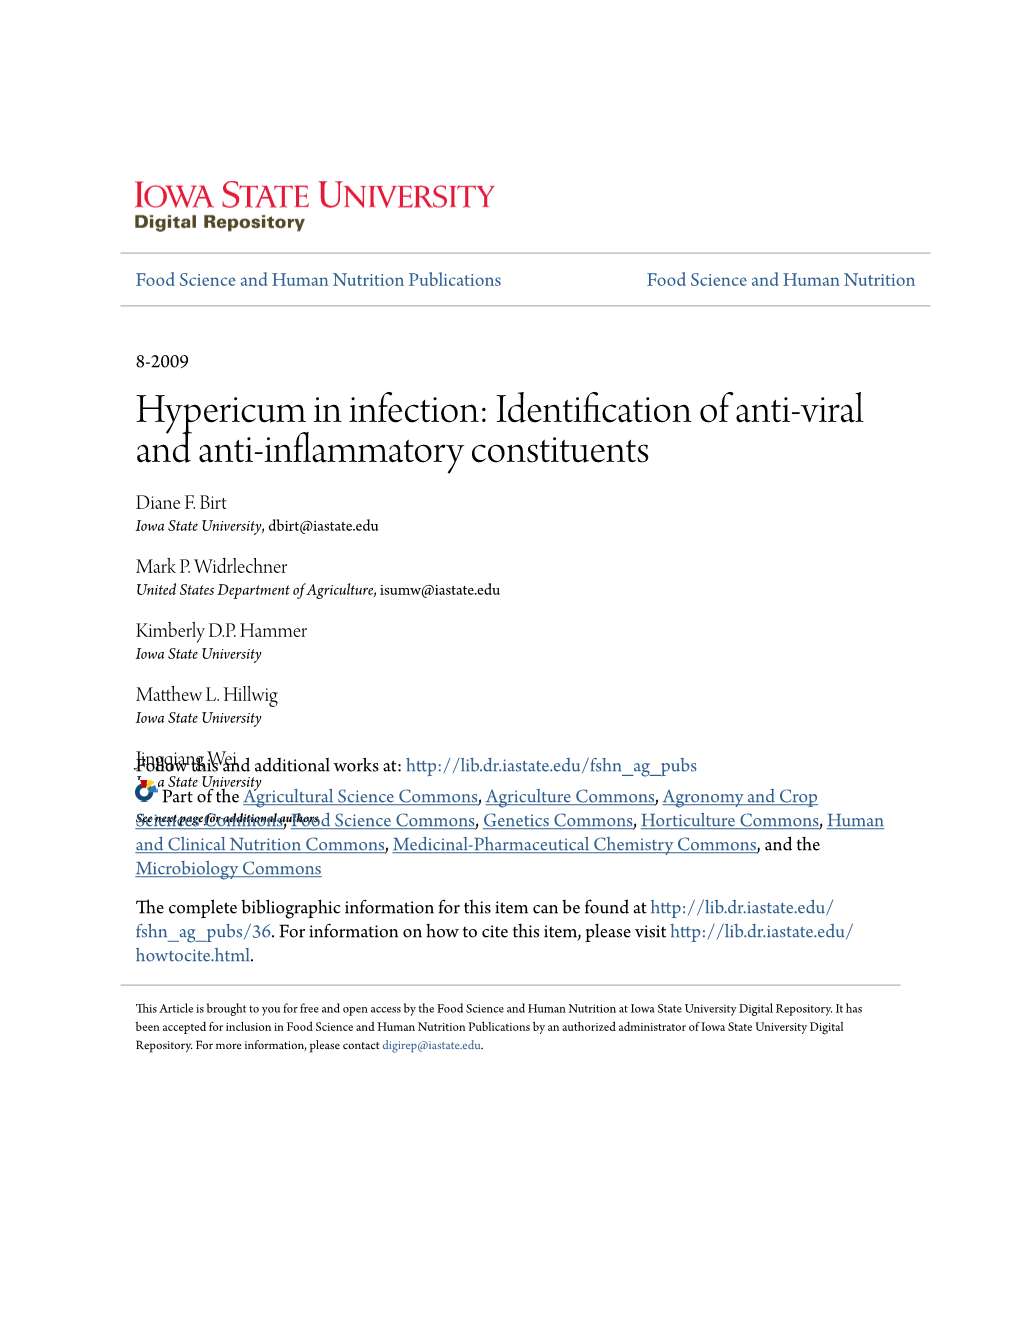 Hypericum in Infection: Identification of Anti-Viral and Anti-Inflammatory Constituents Diane F